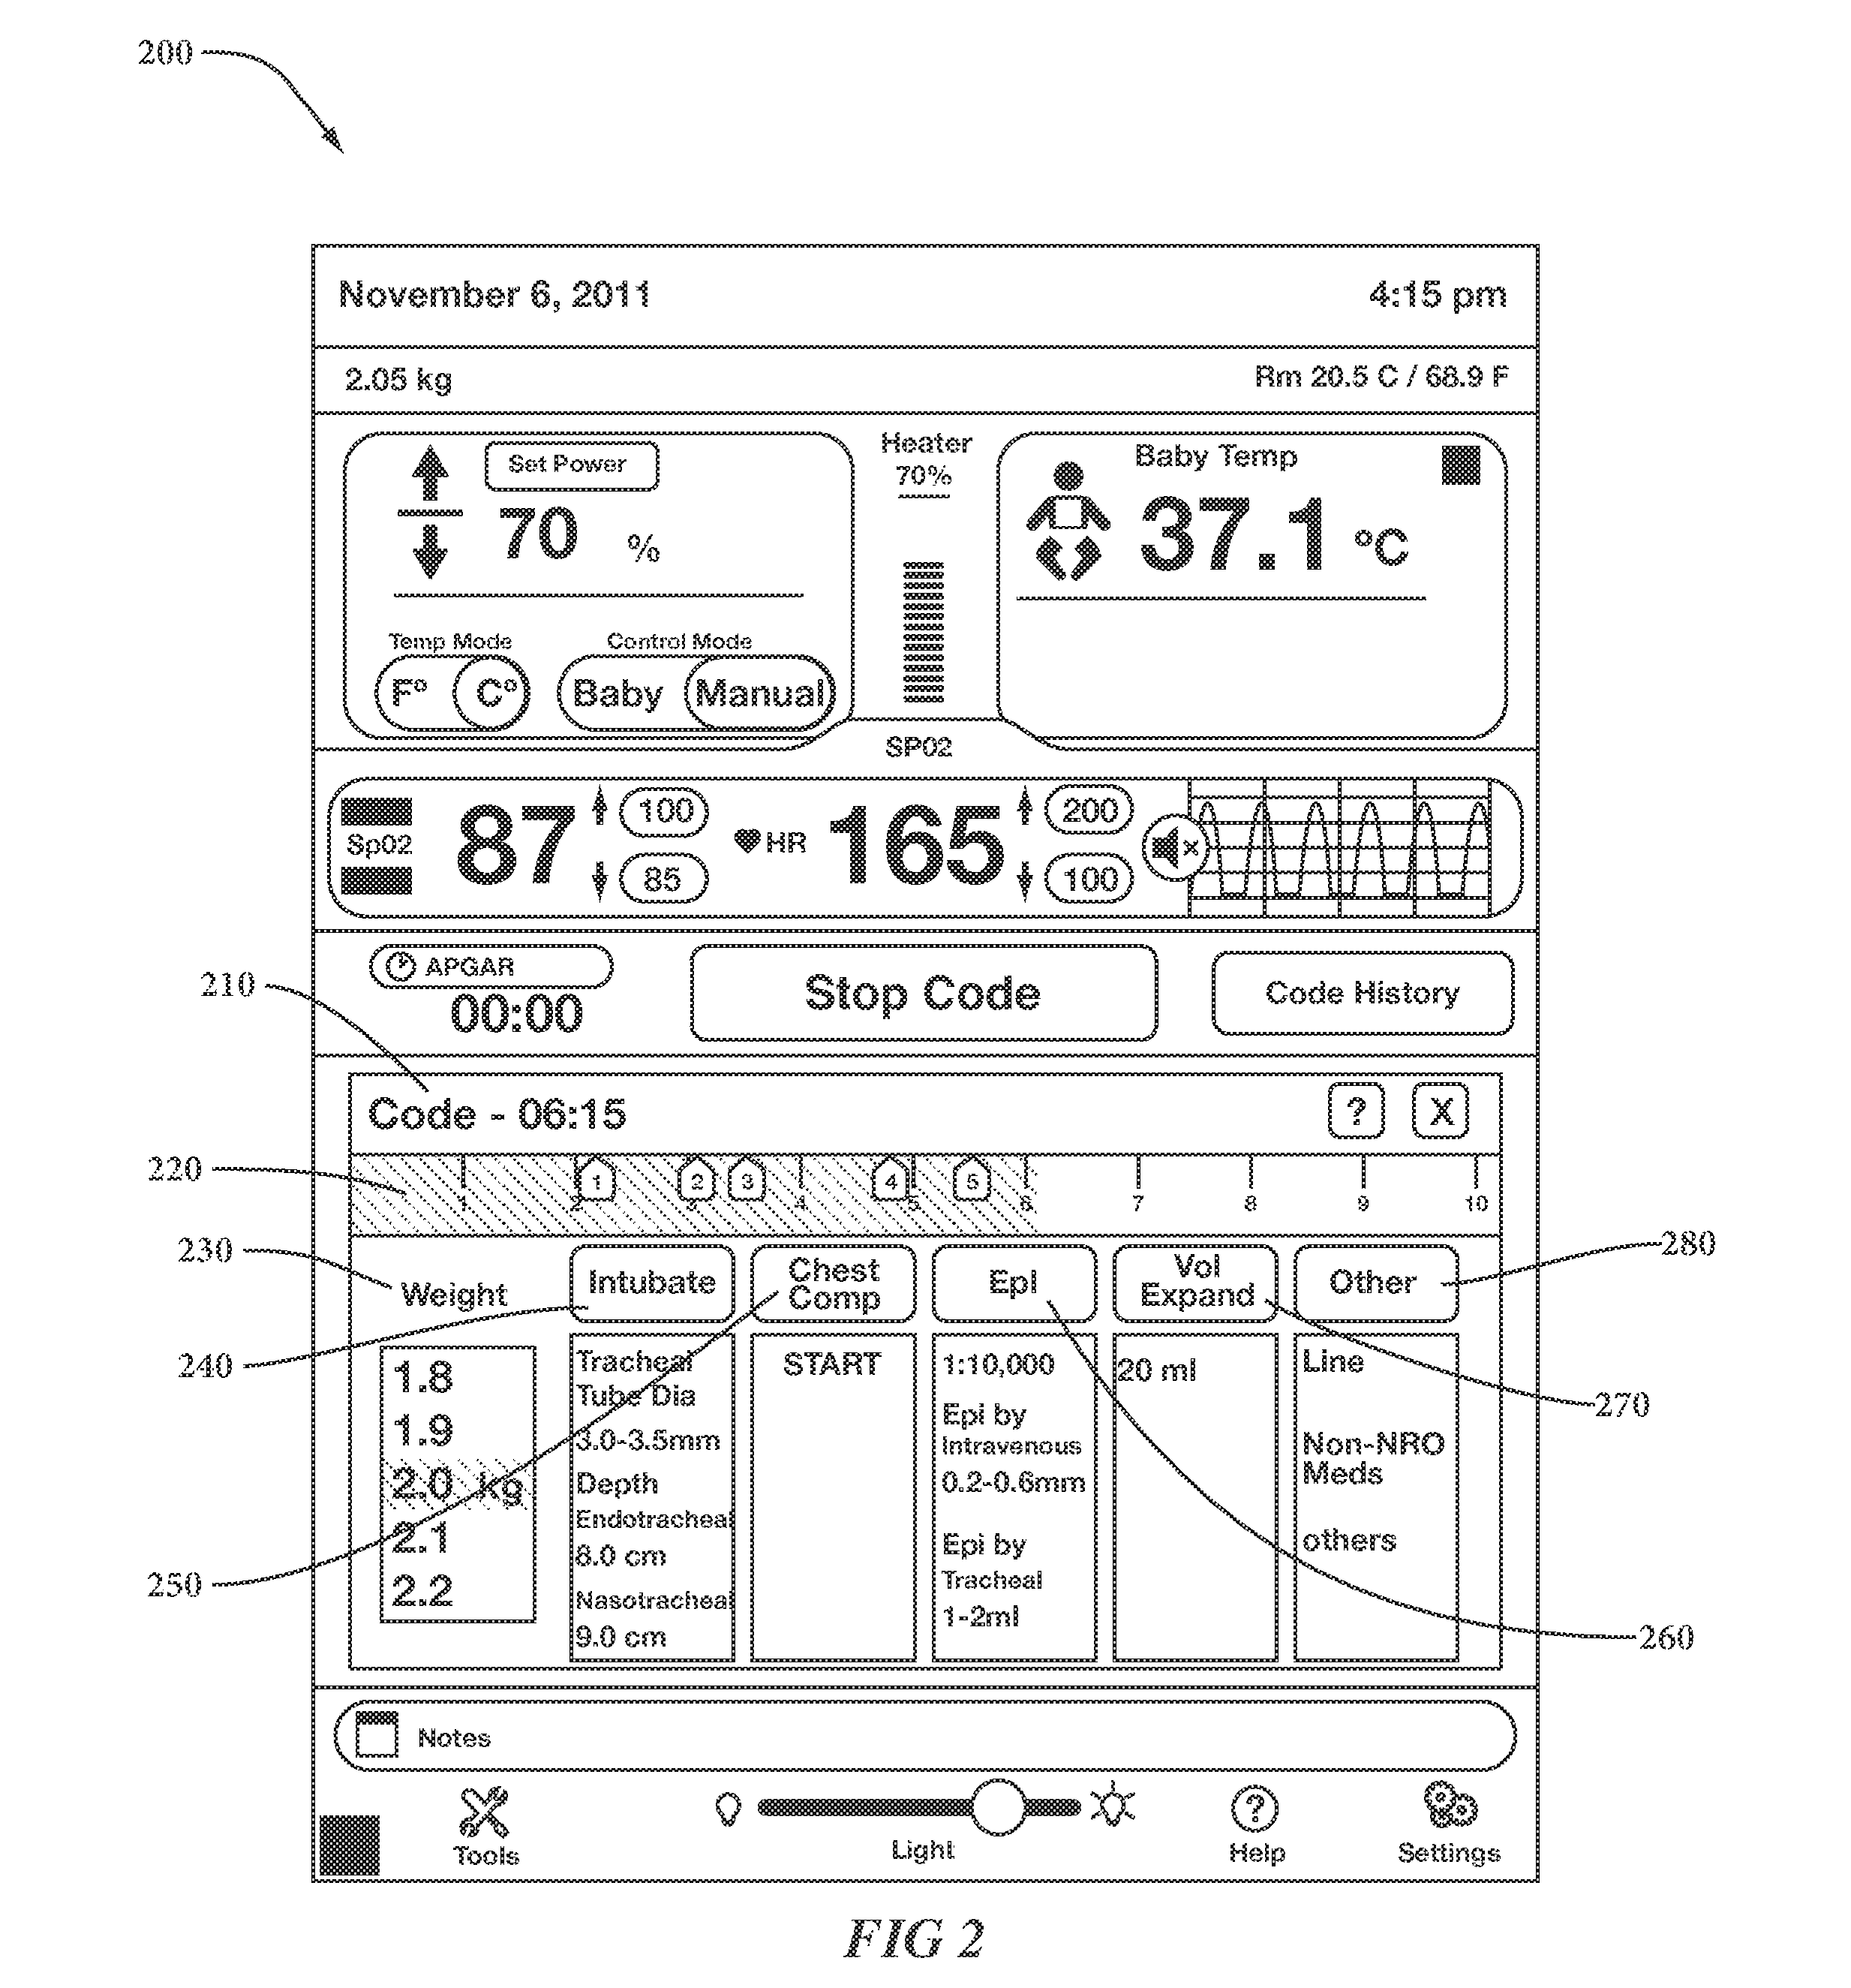 Code Support Device for Infant Care Devices